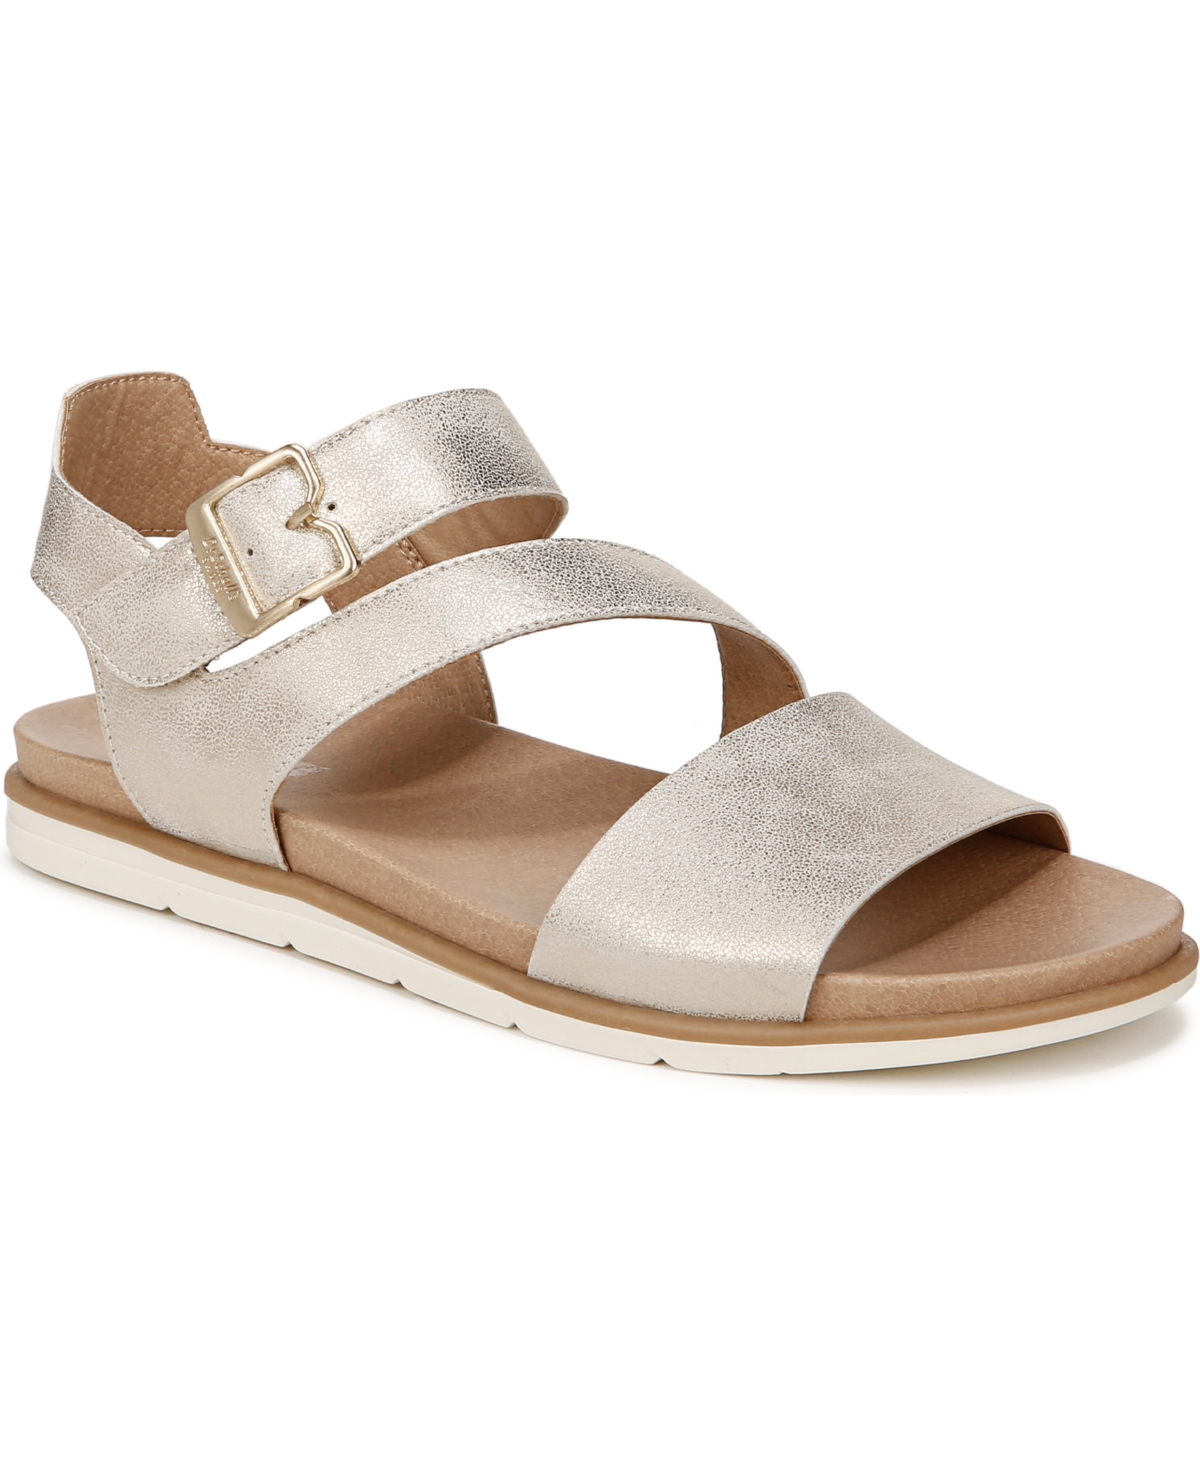 Dr. Scholl's Women's Nicely Fun Strappy Sandals In Light Gold Faux Leather